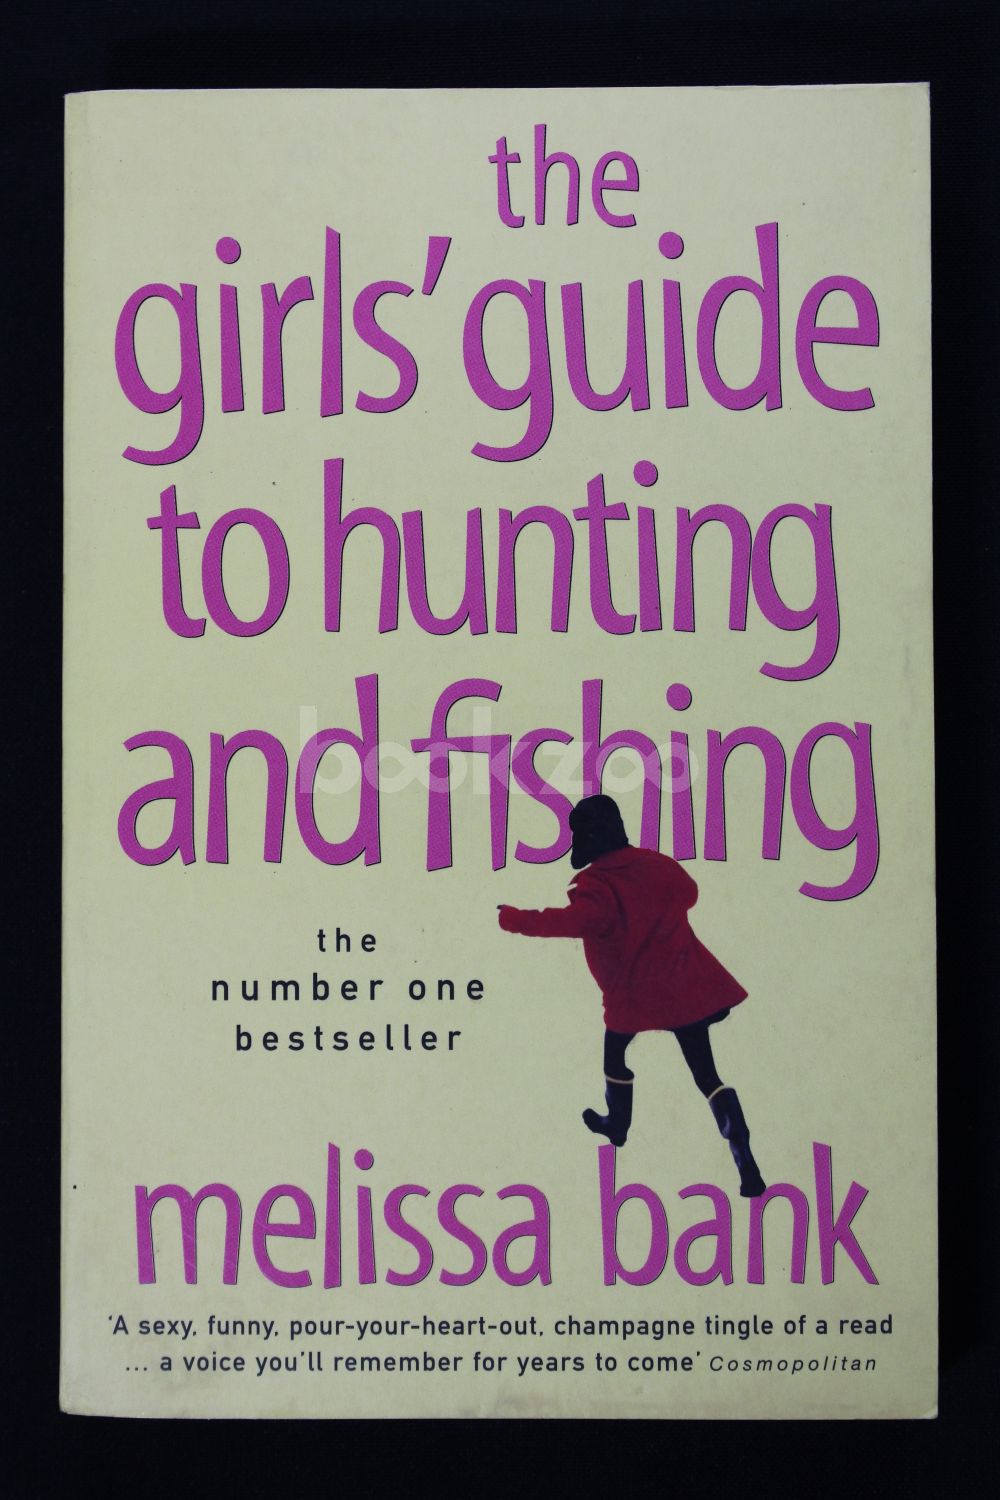 Buy The Girls' Guide to Hunting and Fishing at online bookstore